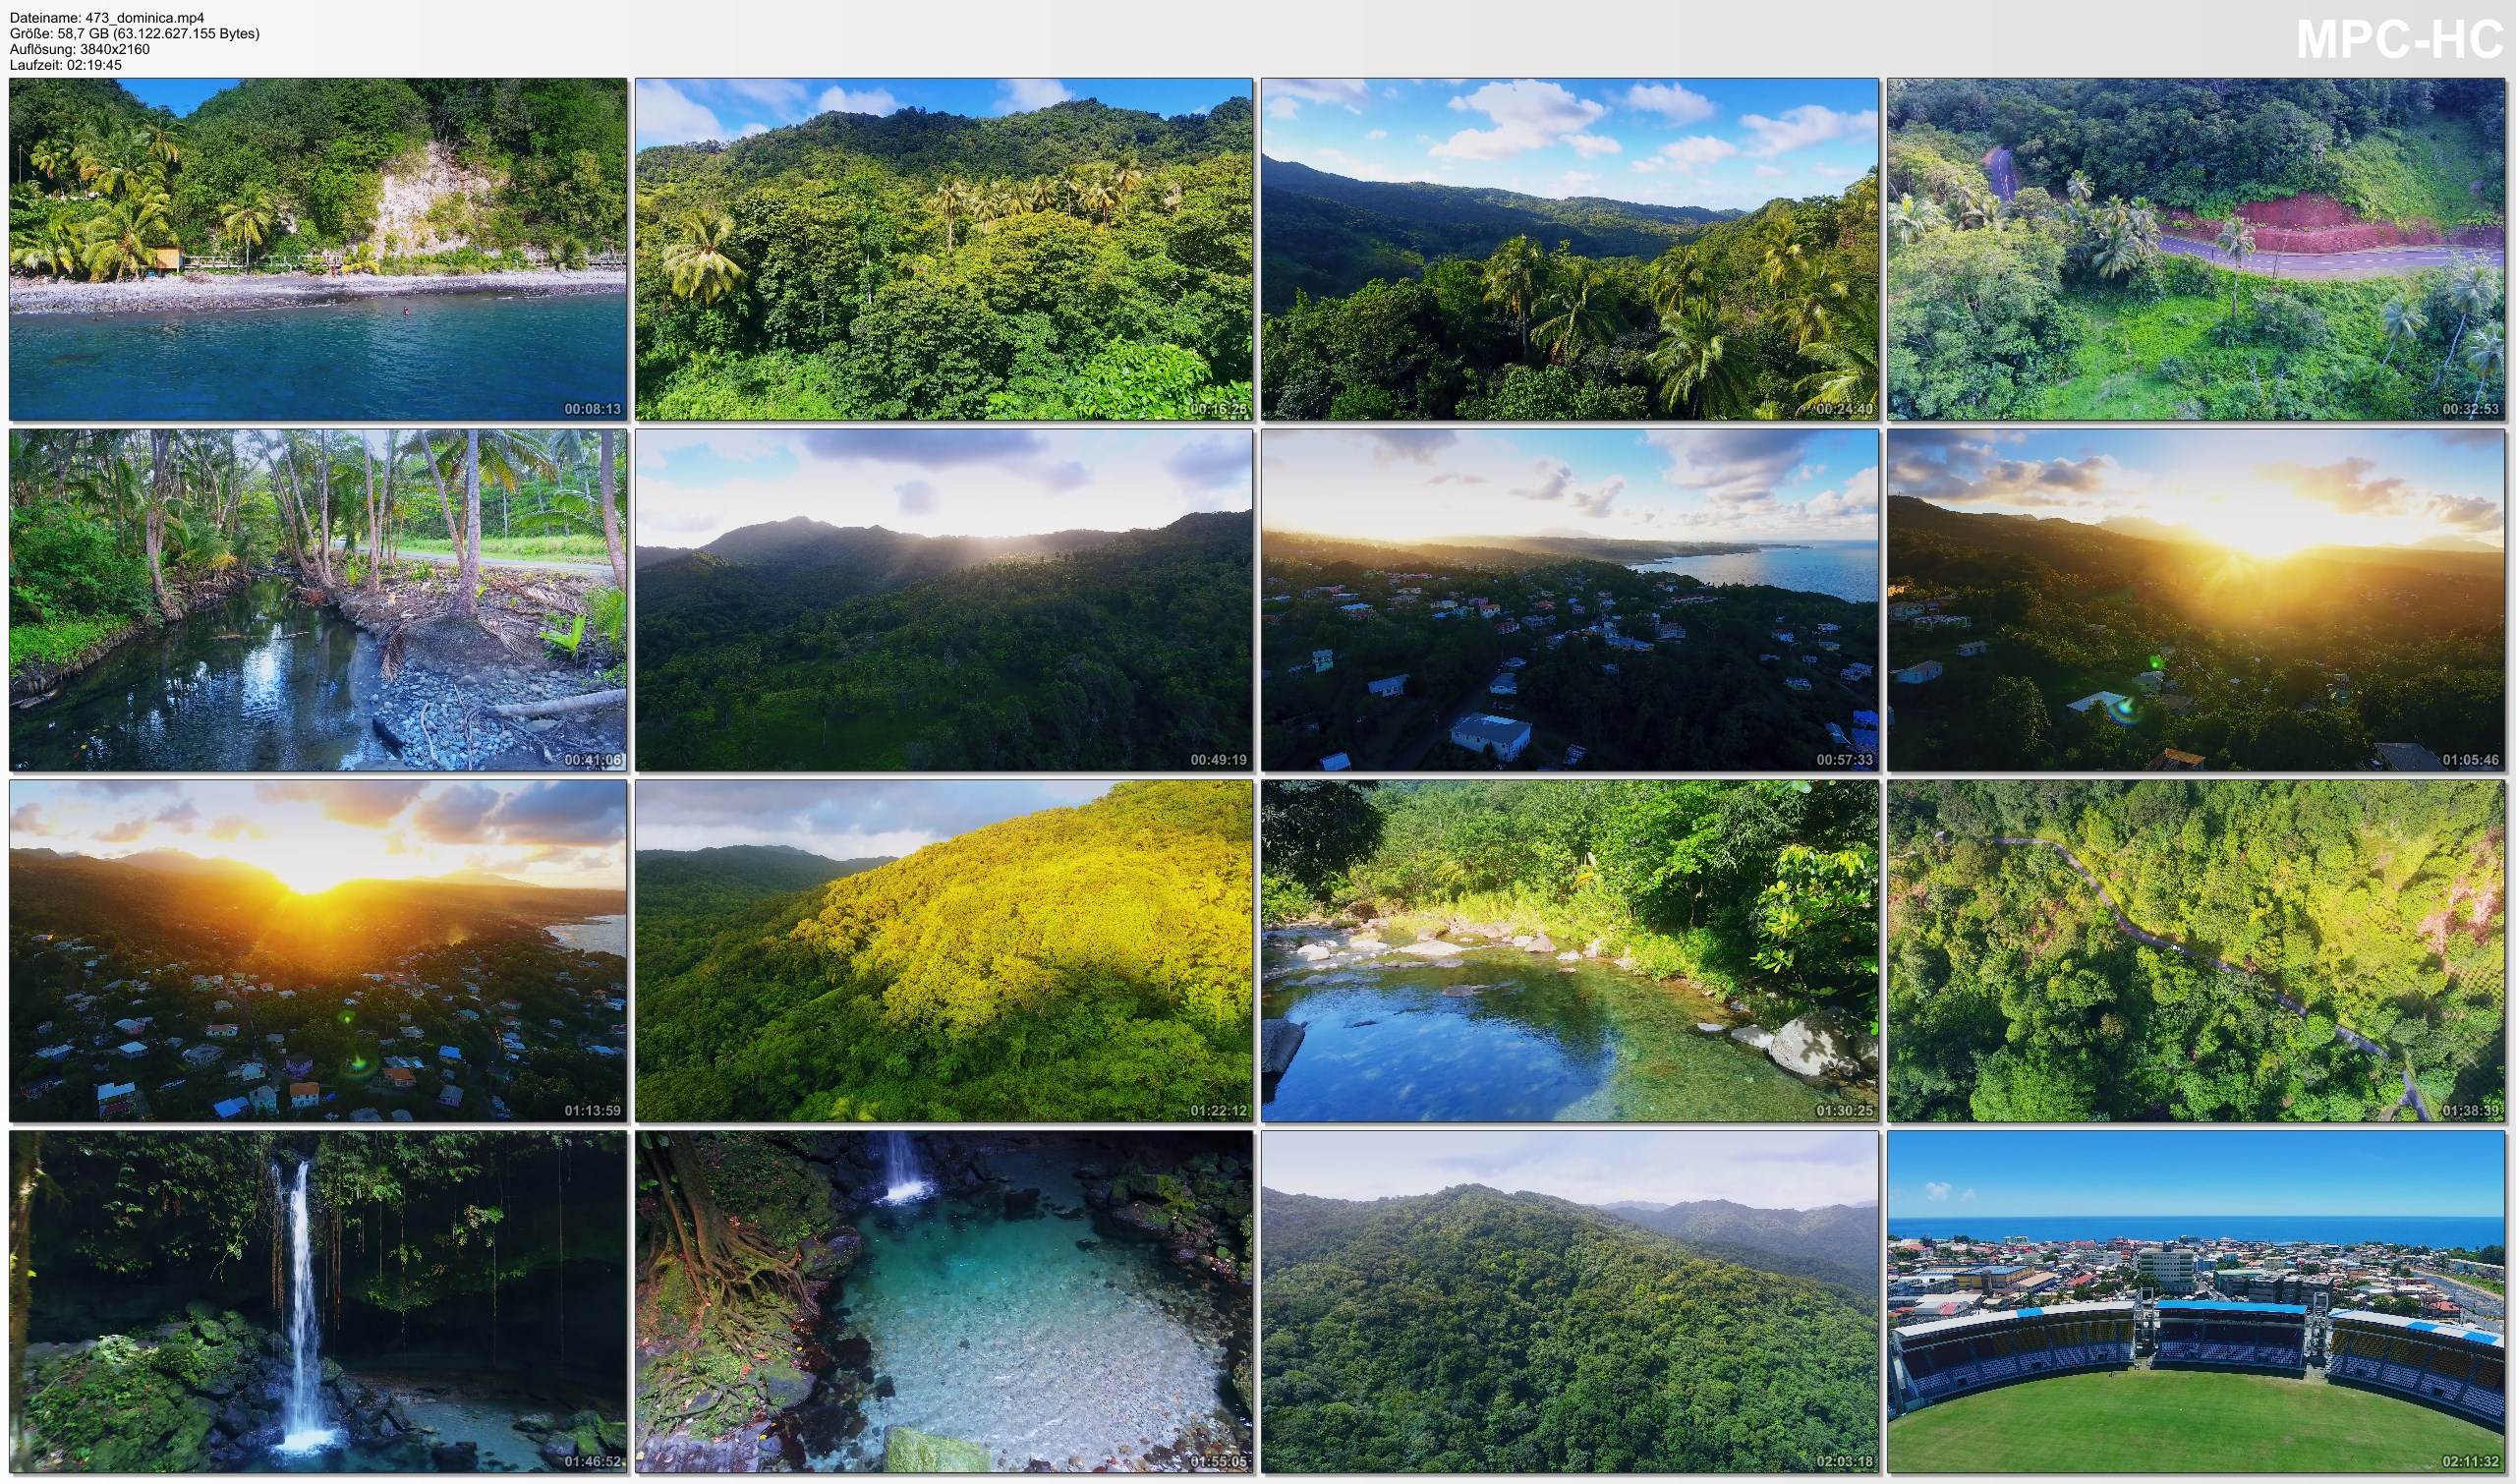 Drone Pictures from Video 【4K】Drone RAW Footage | This is DOMINICA 2020 | Caribbean | Roseau and More | UltraHD Stock Video